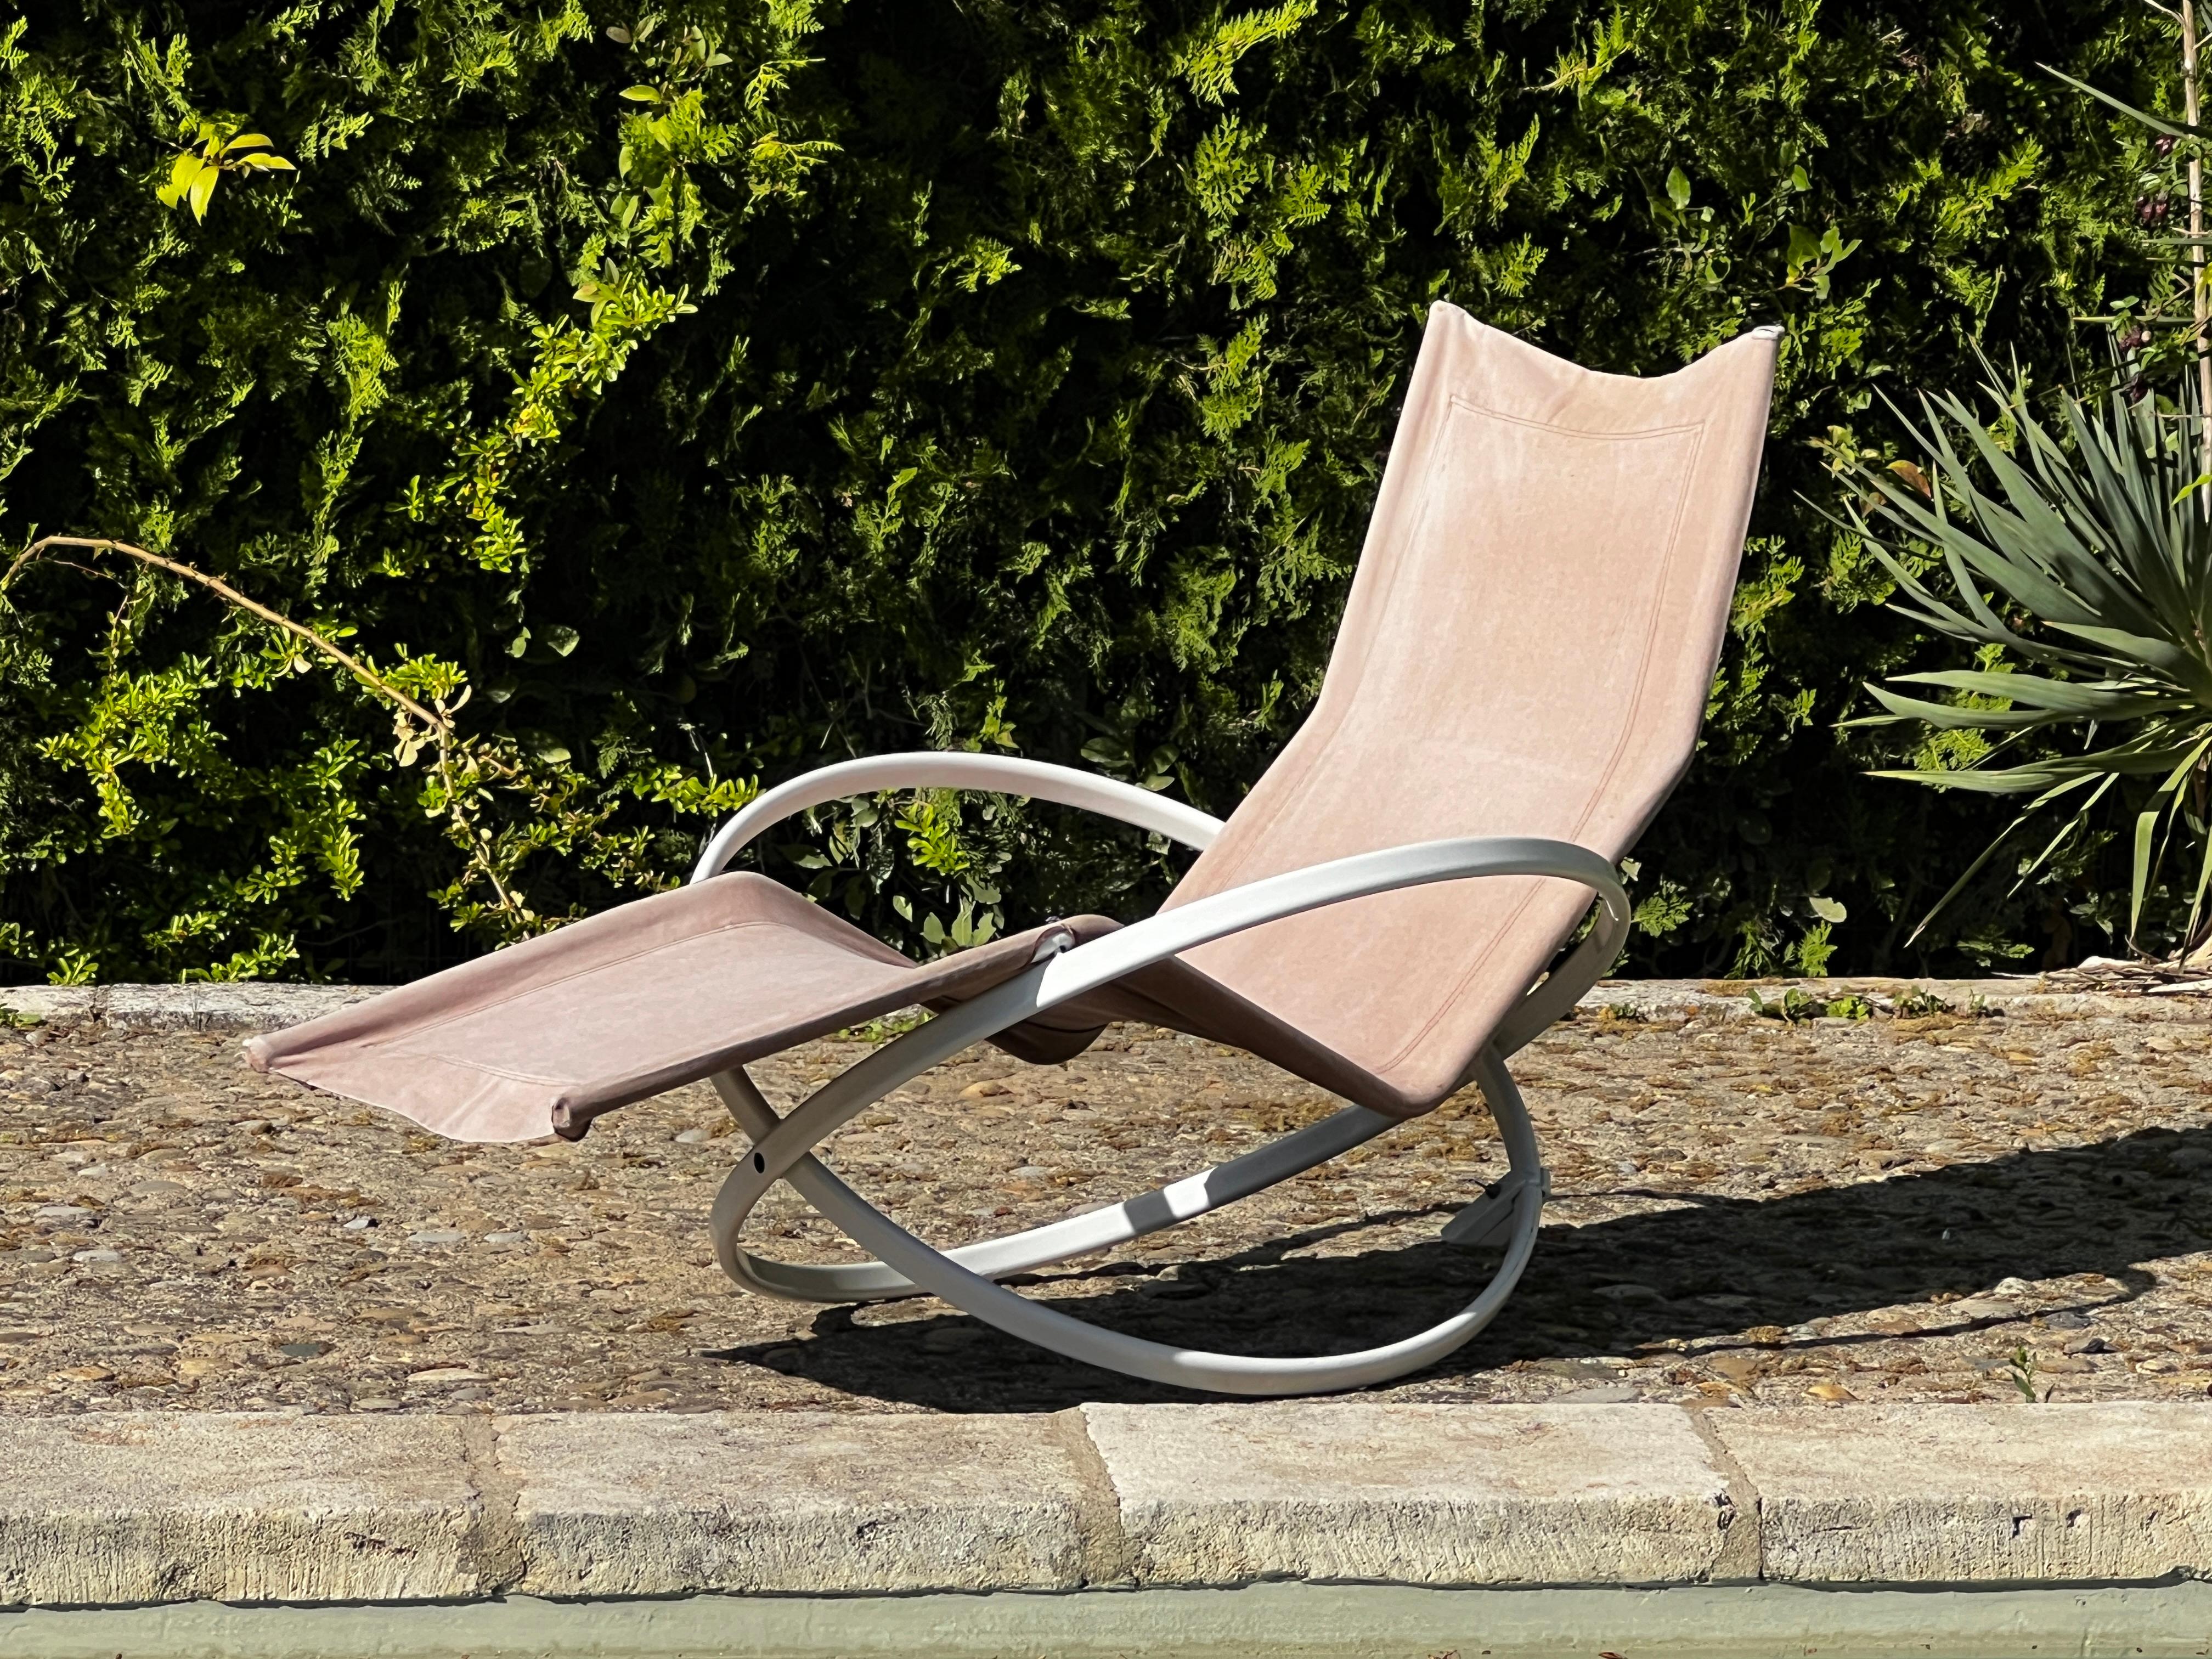 Metal 20th Century Design Roger Lecal Rocking Chaise Longue, Jetstar Model, 1975 For Sale